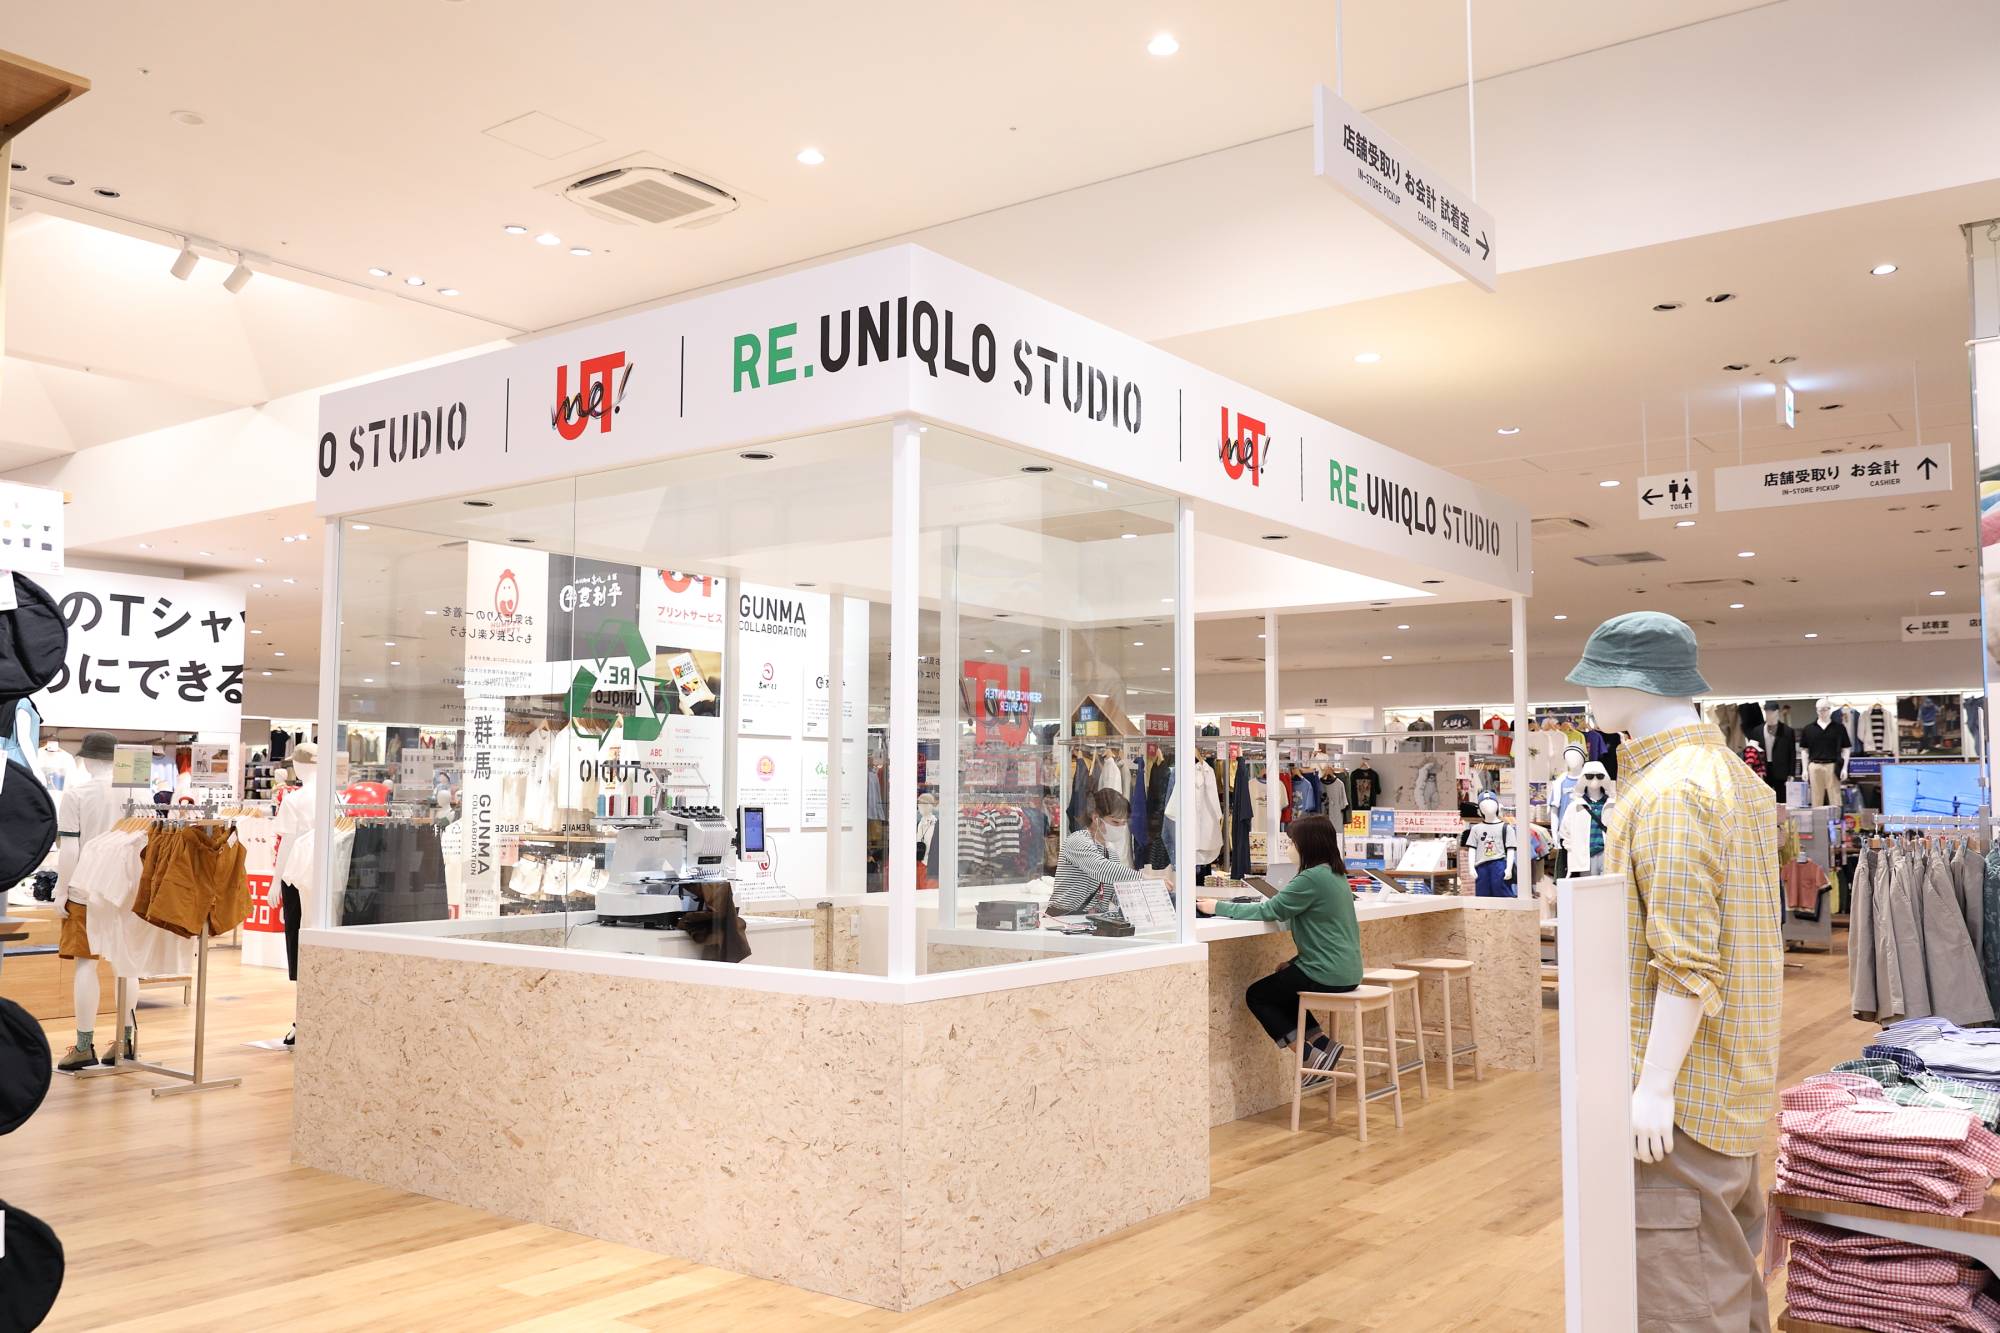 The story of Uniqlo by Ariel Lam